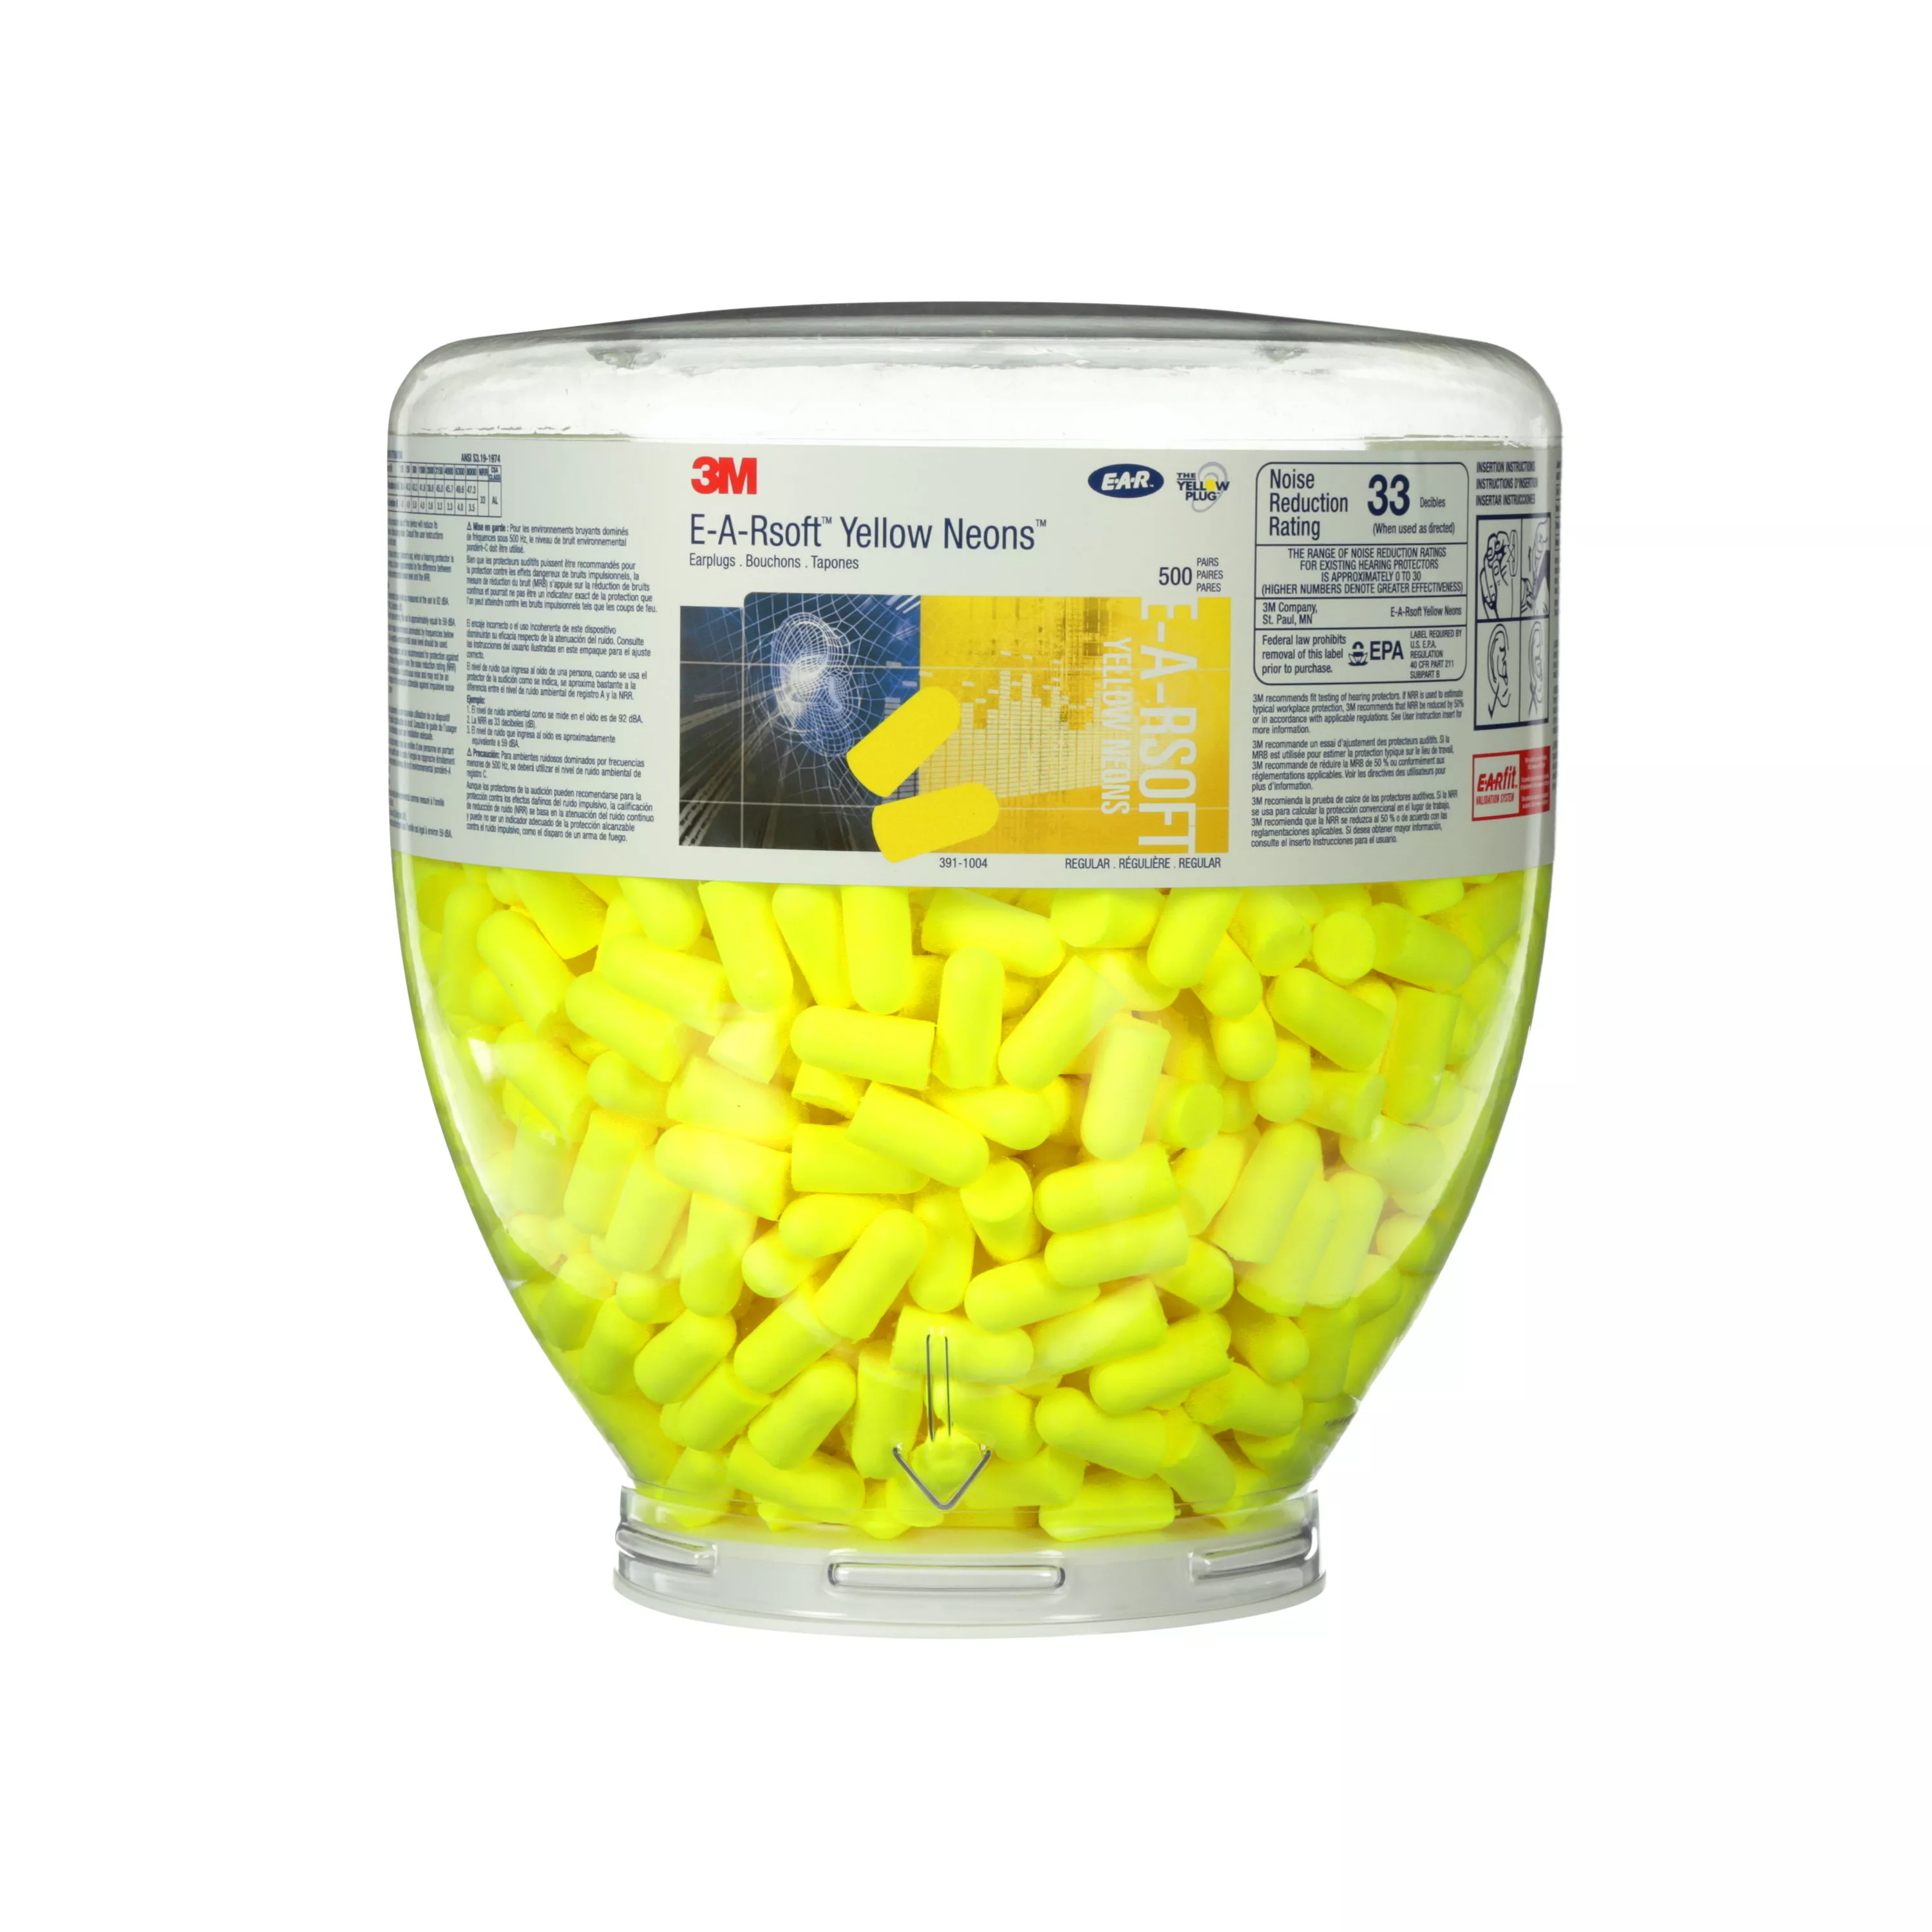 3M™ E-A-Rsoft™ Yellow Neons™ One Touch™ Refill Earplugs 391-1004,
Uncorded, Regular Size, 2000 Pair/Case